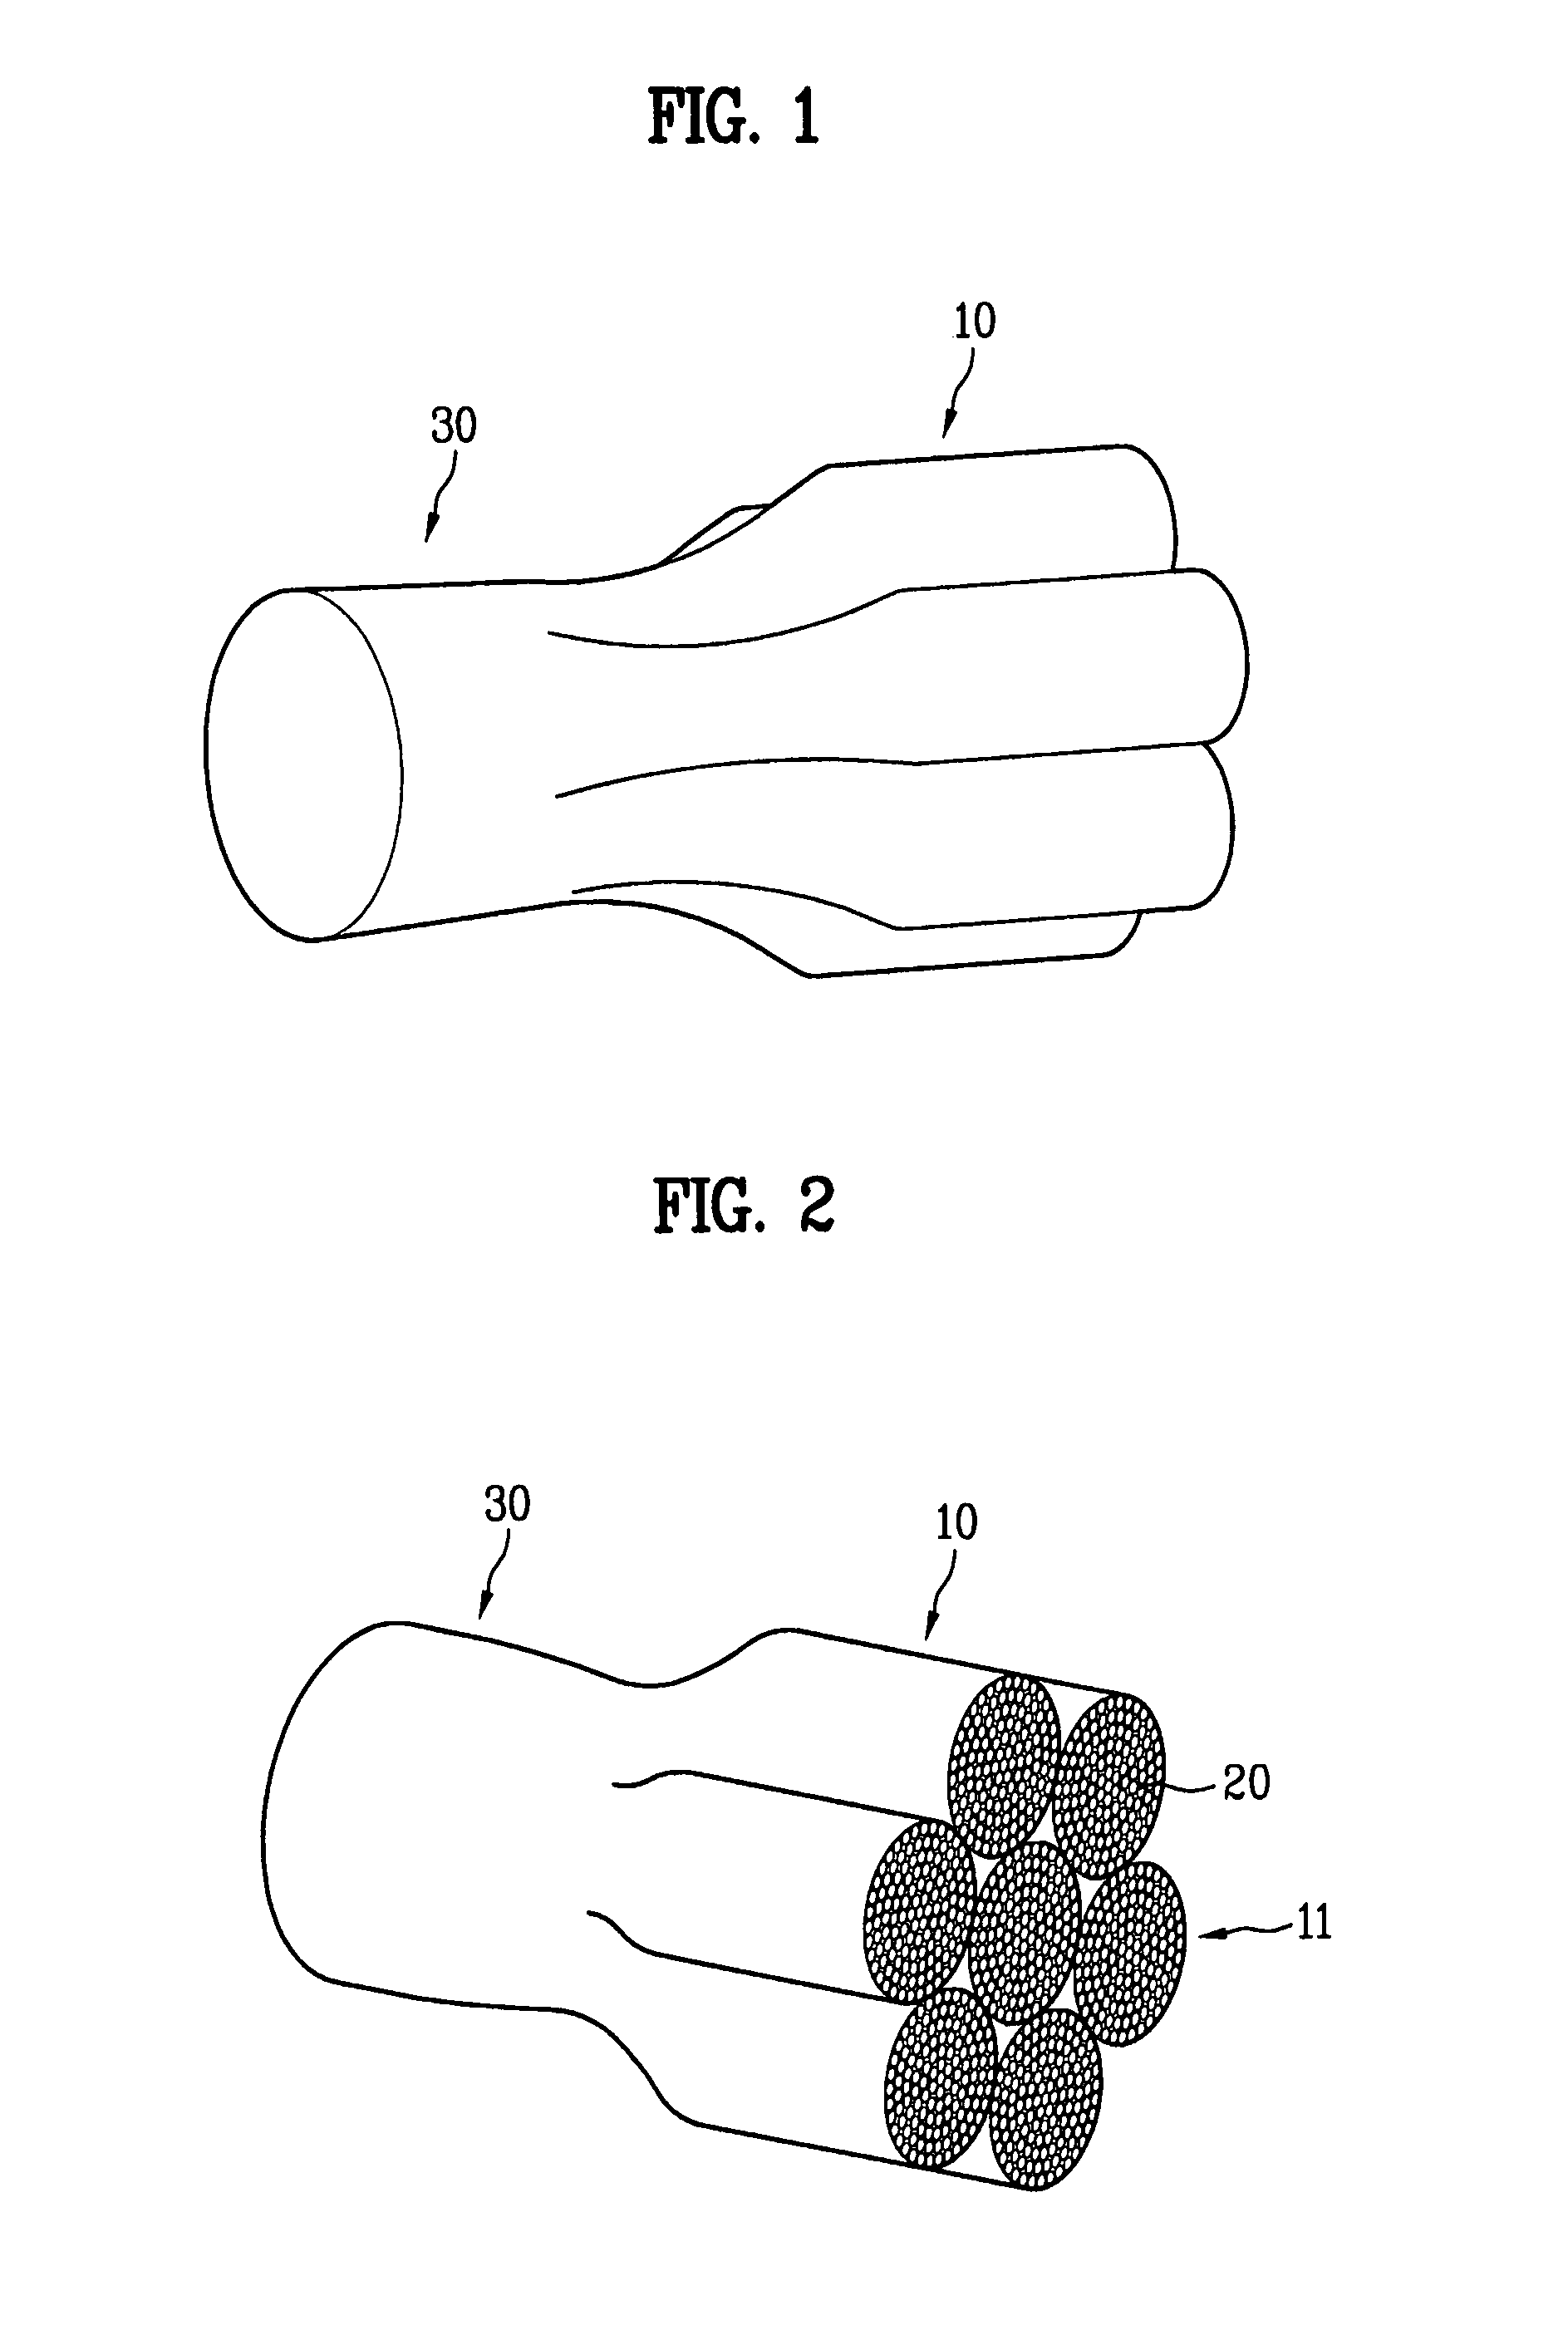 Laser display device and optical coupler therefor